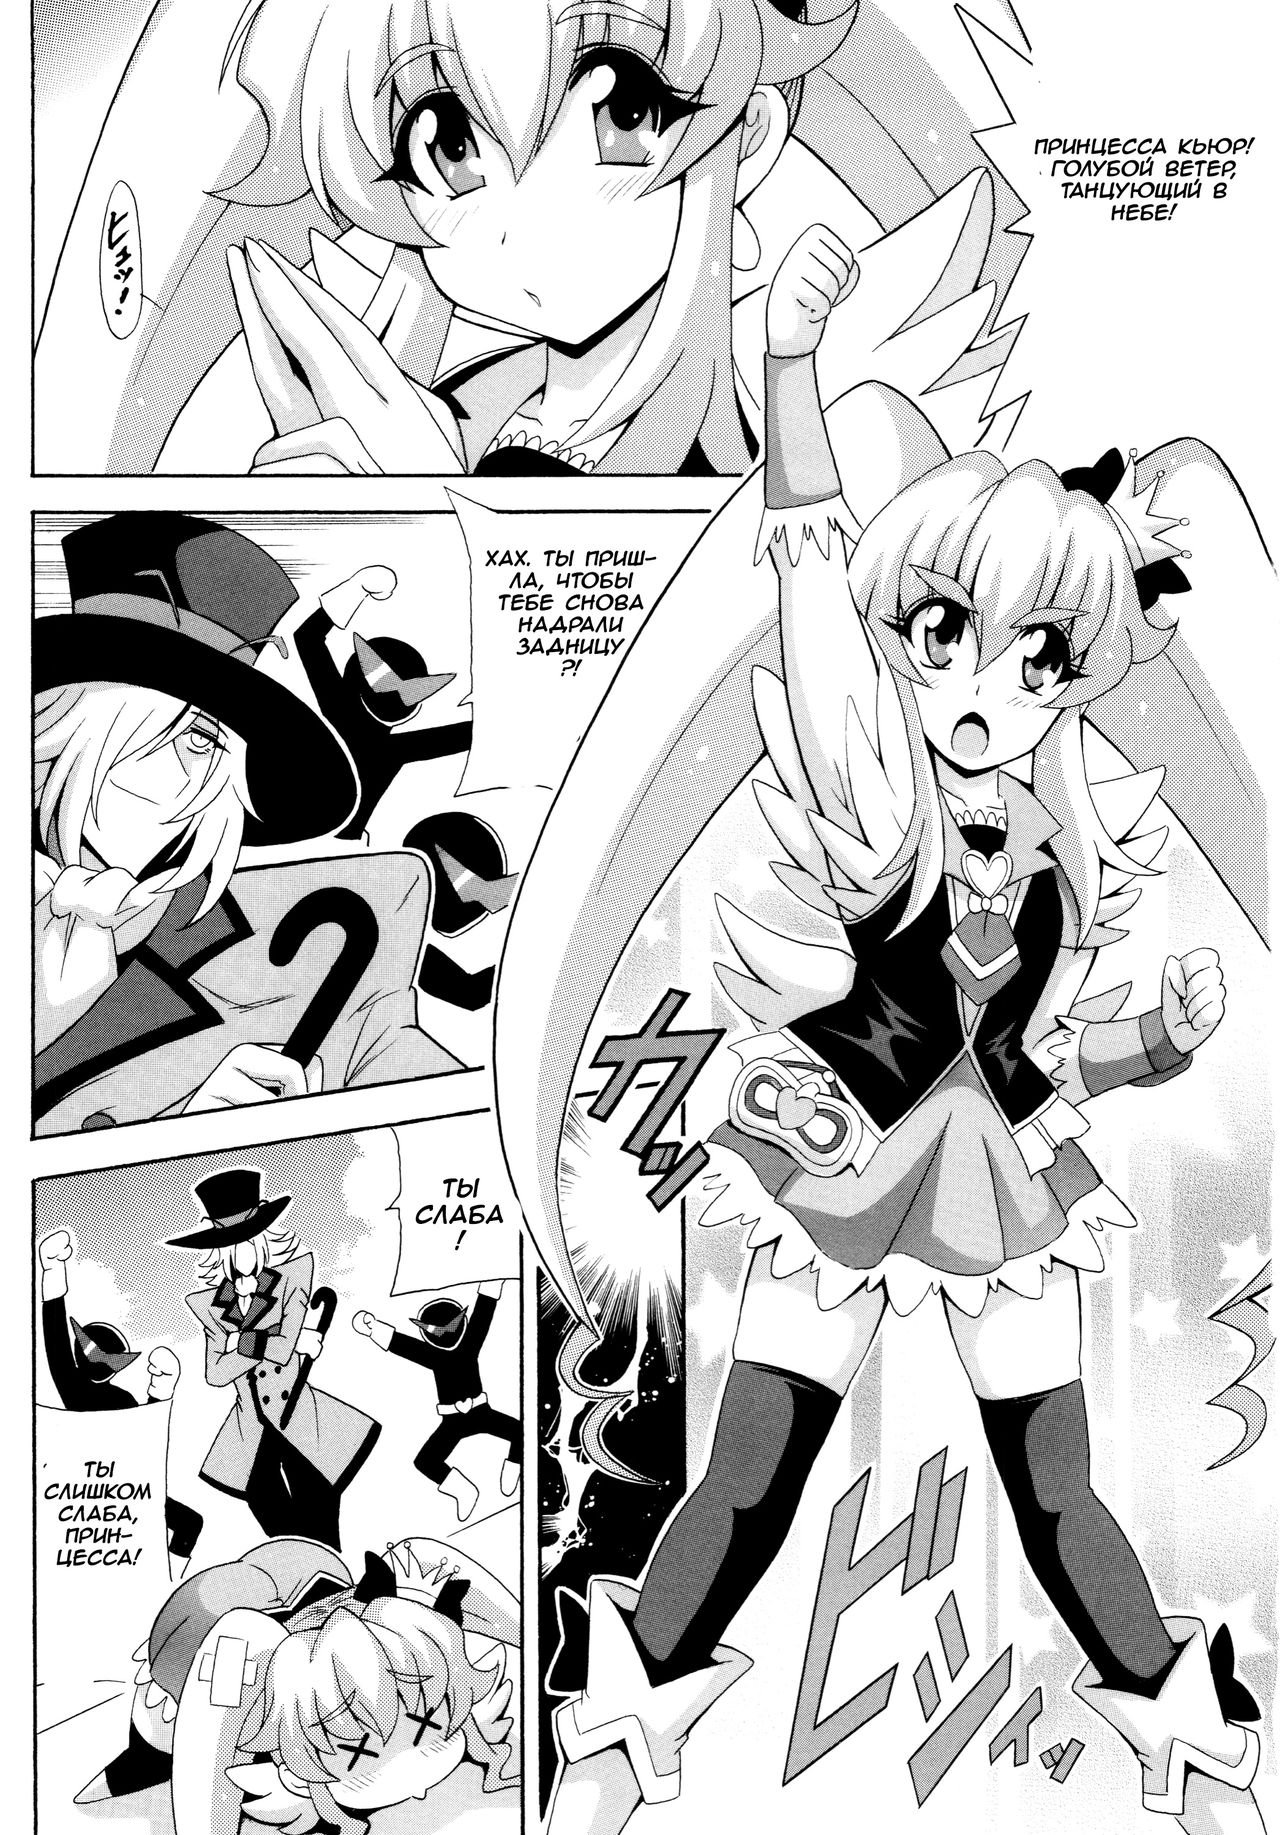 (COMIC1☆8) [Leaz Koubou (Oujano Kaze)] THE WEAKEST-PRINCESS (HappinessCharge Precure!) [Russian] [Witcher000] (COMIC1☆8) [りーず工房 (王者之風)] THE☆WEAKEST-PRINCESS (ハピネスチャージプリキュア！) [ロシア翻訳]